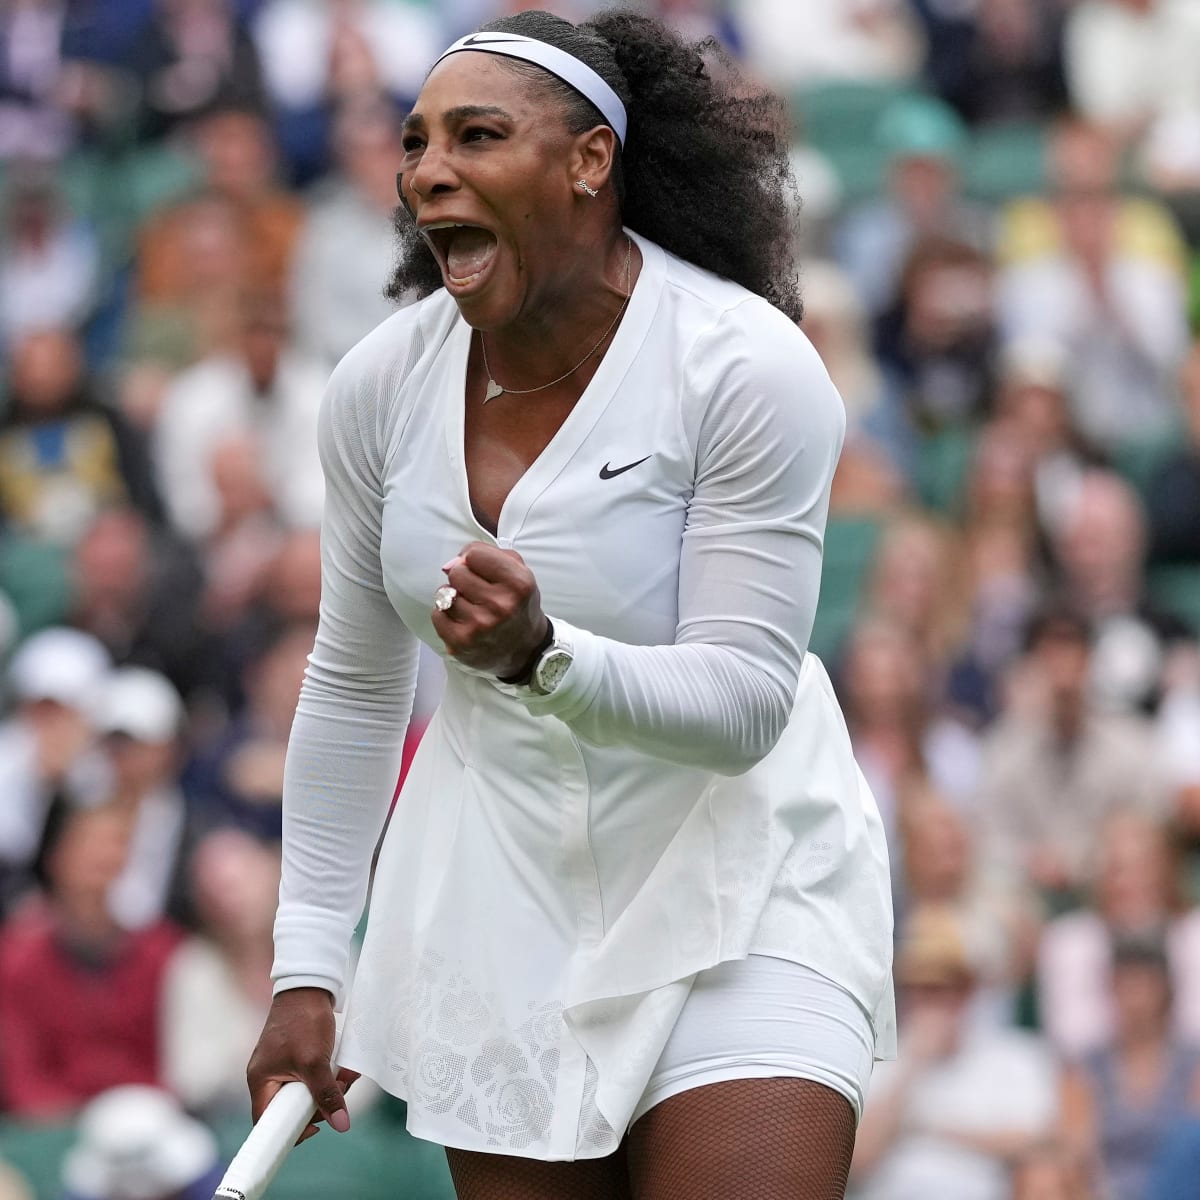 Serena Williams Falls at Wimbledon, but Shows This May Not Be the End